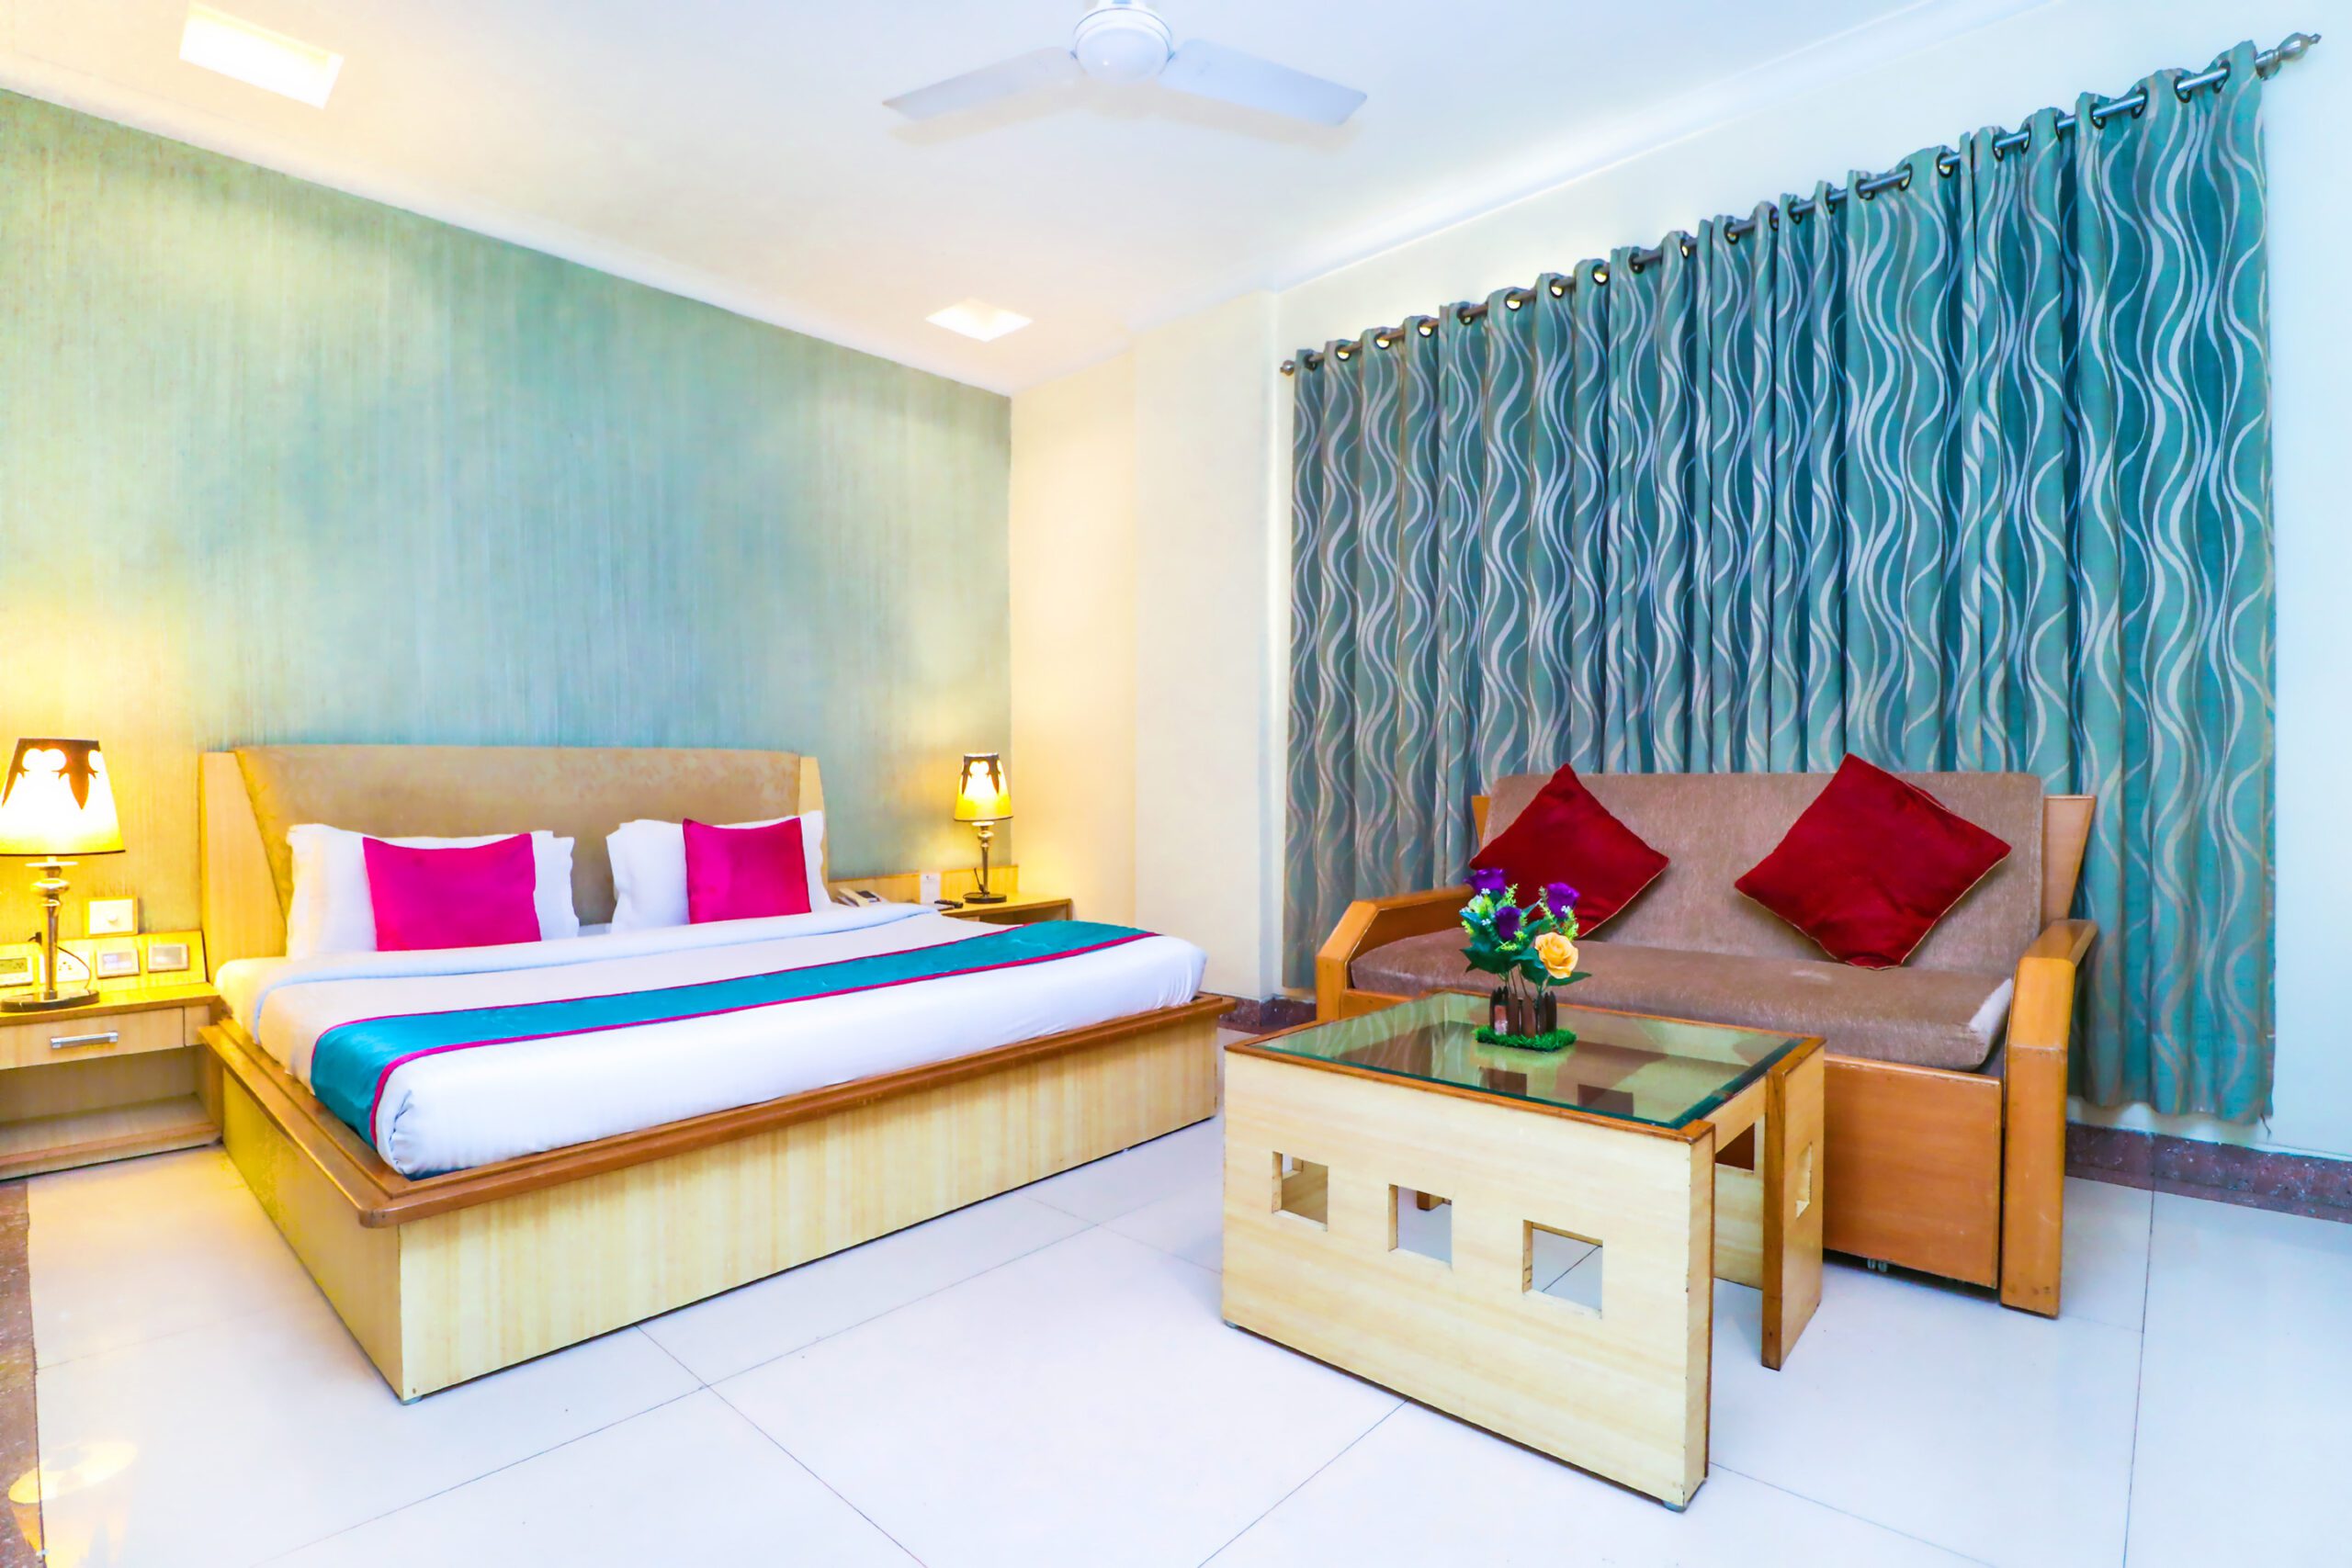 Spacious bedrooms extend to the guest's entertaining sitting area giving a personal touch.